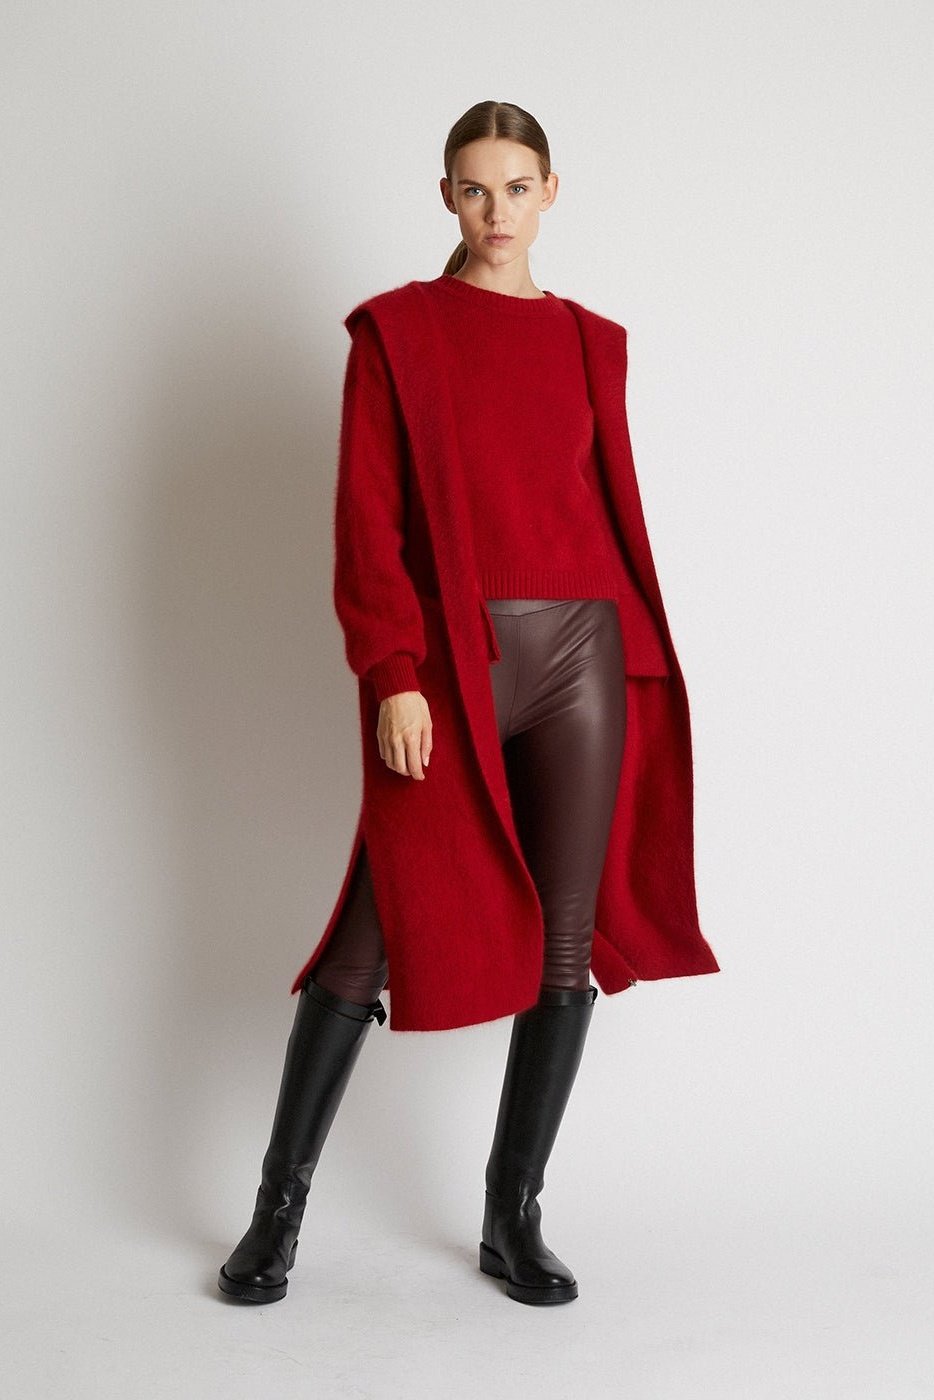 +Beryll Cashmere Coat with Hood | Cherry Red - +Beryll Cashmere Coat with Hood | Cherry Red - +Beryll Worn By Good People